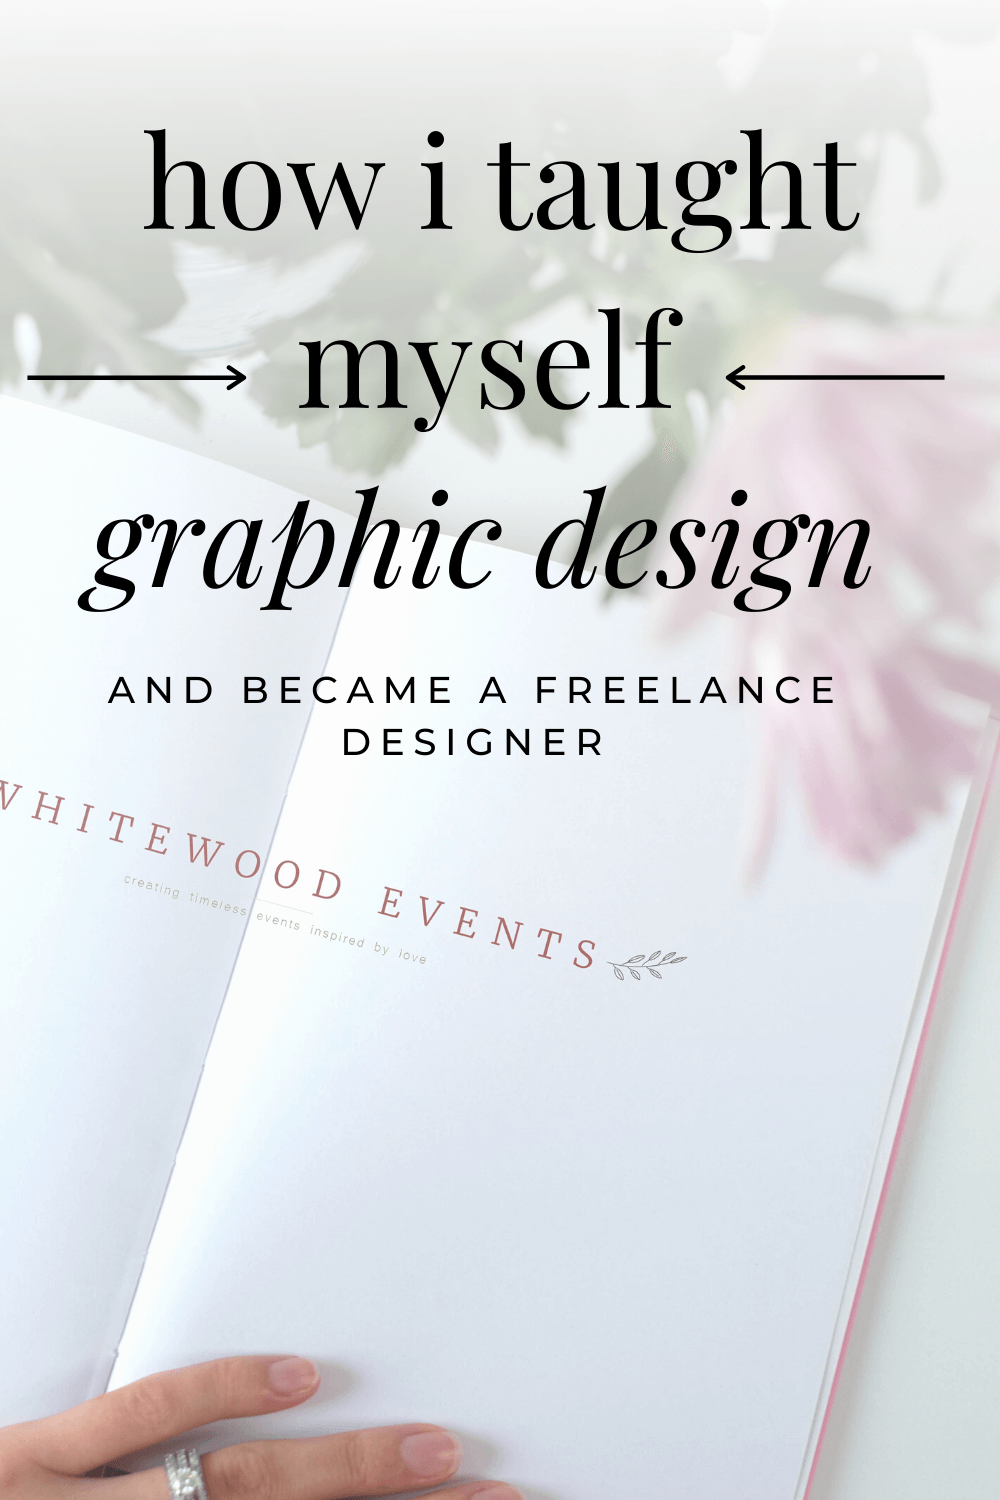 How to teach yourself graphic design